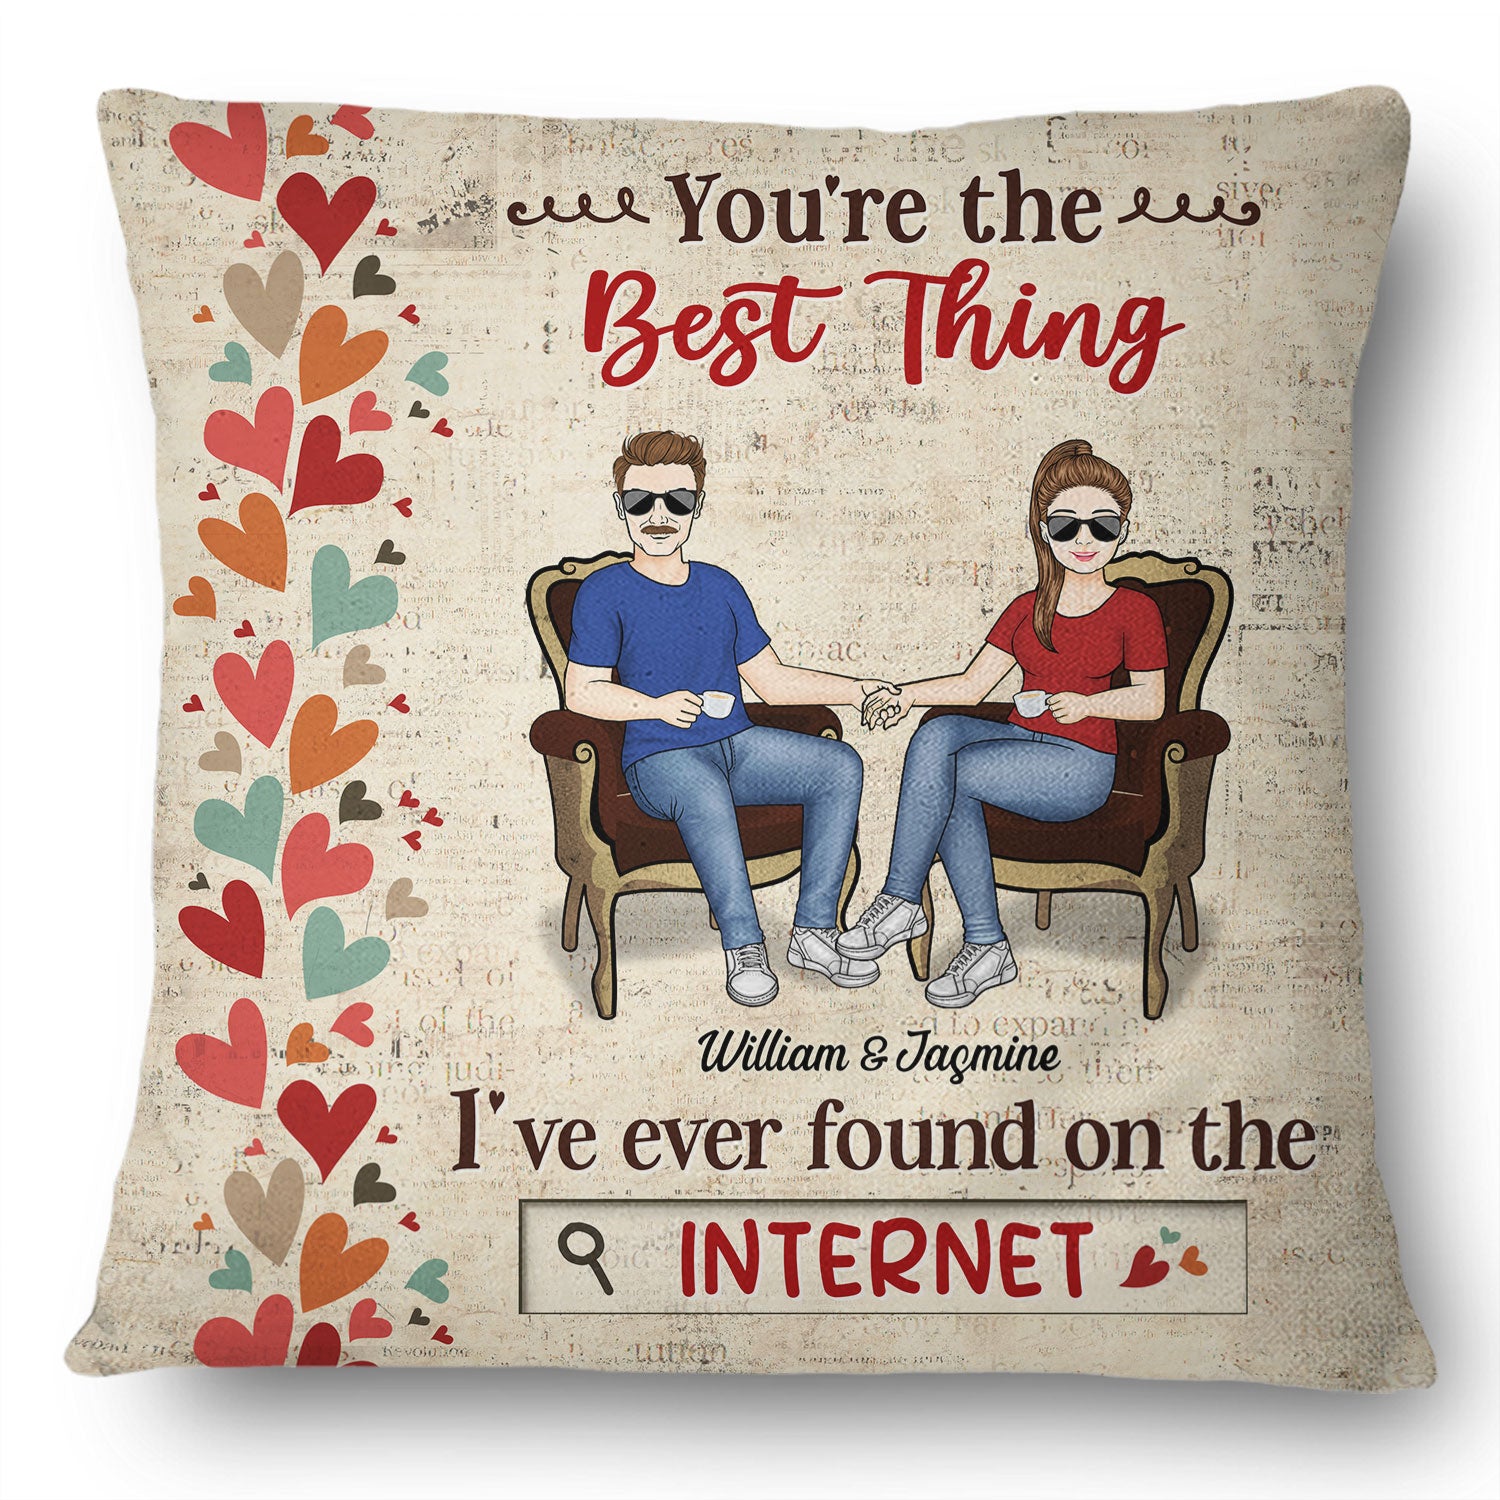 The Best Thing I've Ever Found - Couple Gift - Personalized Custom Pillow